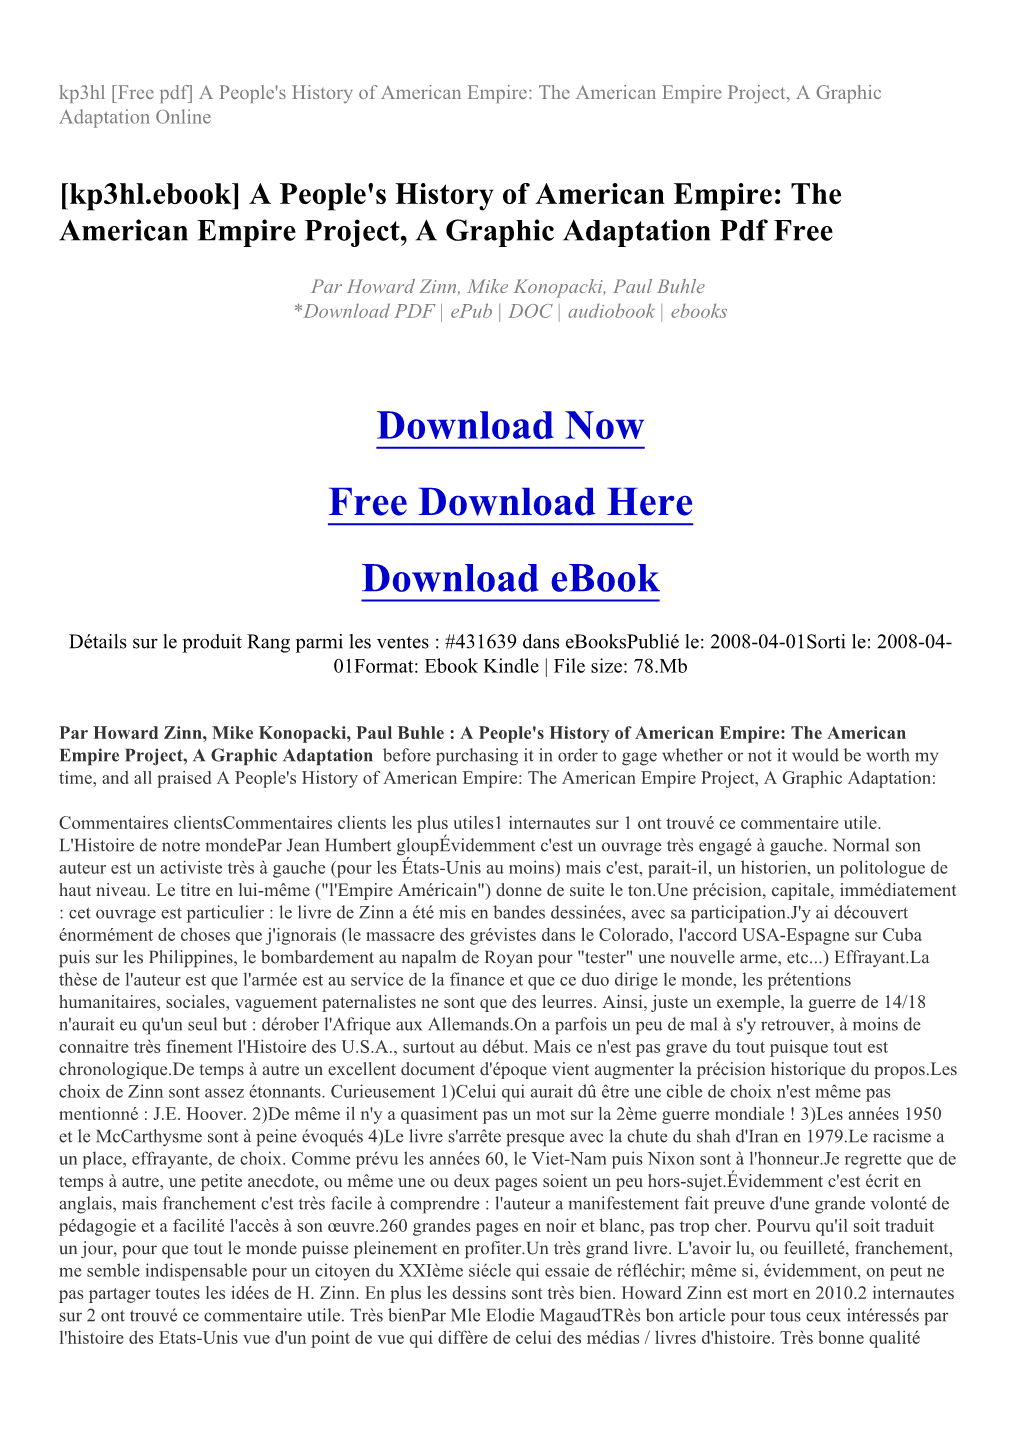 Kp3hl [Free Pdf] a People's History of American Empire: the American Empire Project, a Graphic Adaptation Online